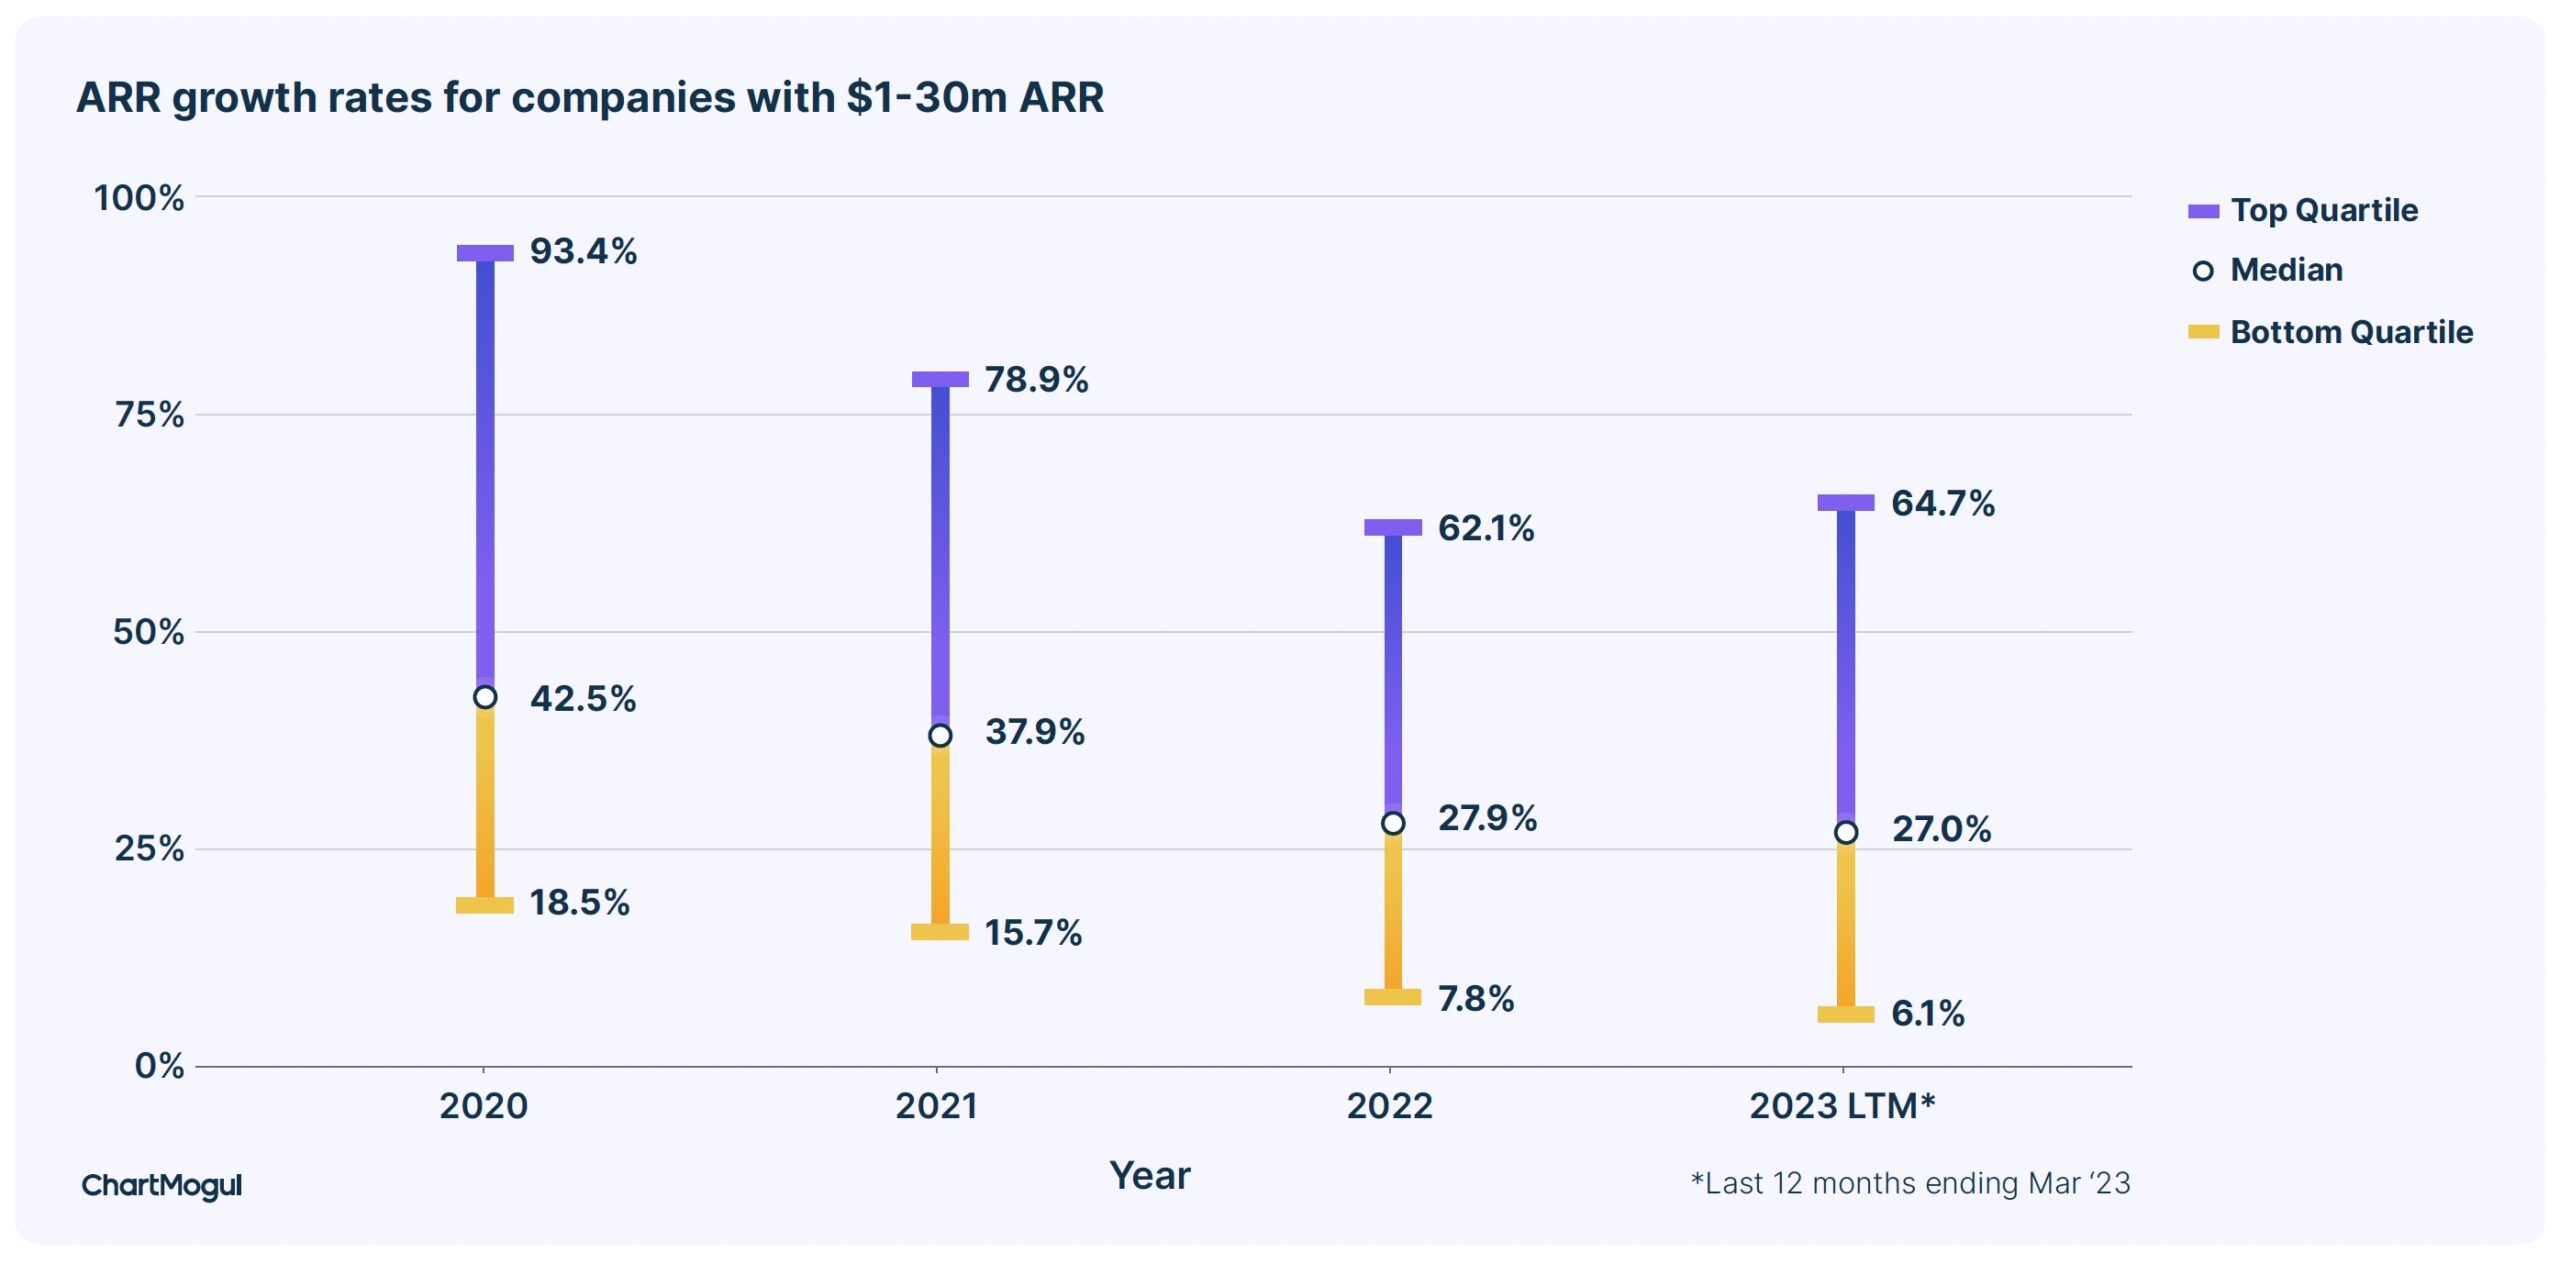 ARR Growth Rates for SaaS Companies with ARR between $1 to $30 million showing SaaS growth is slowing down